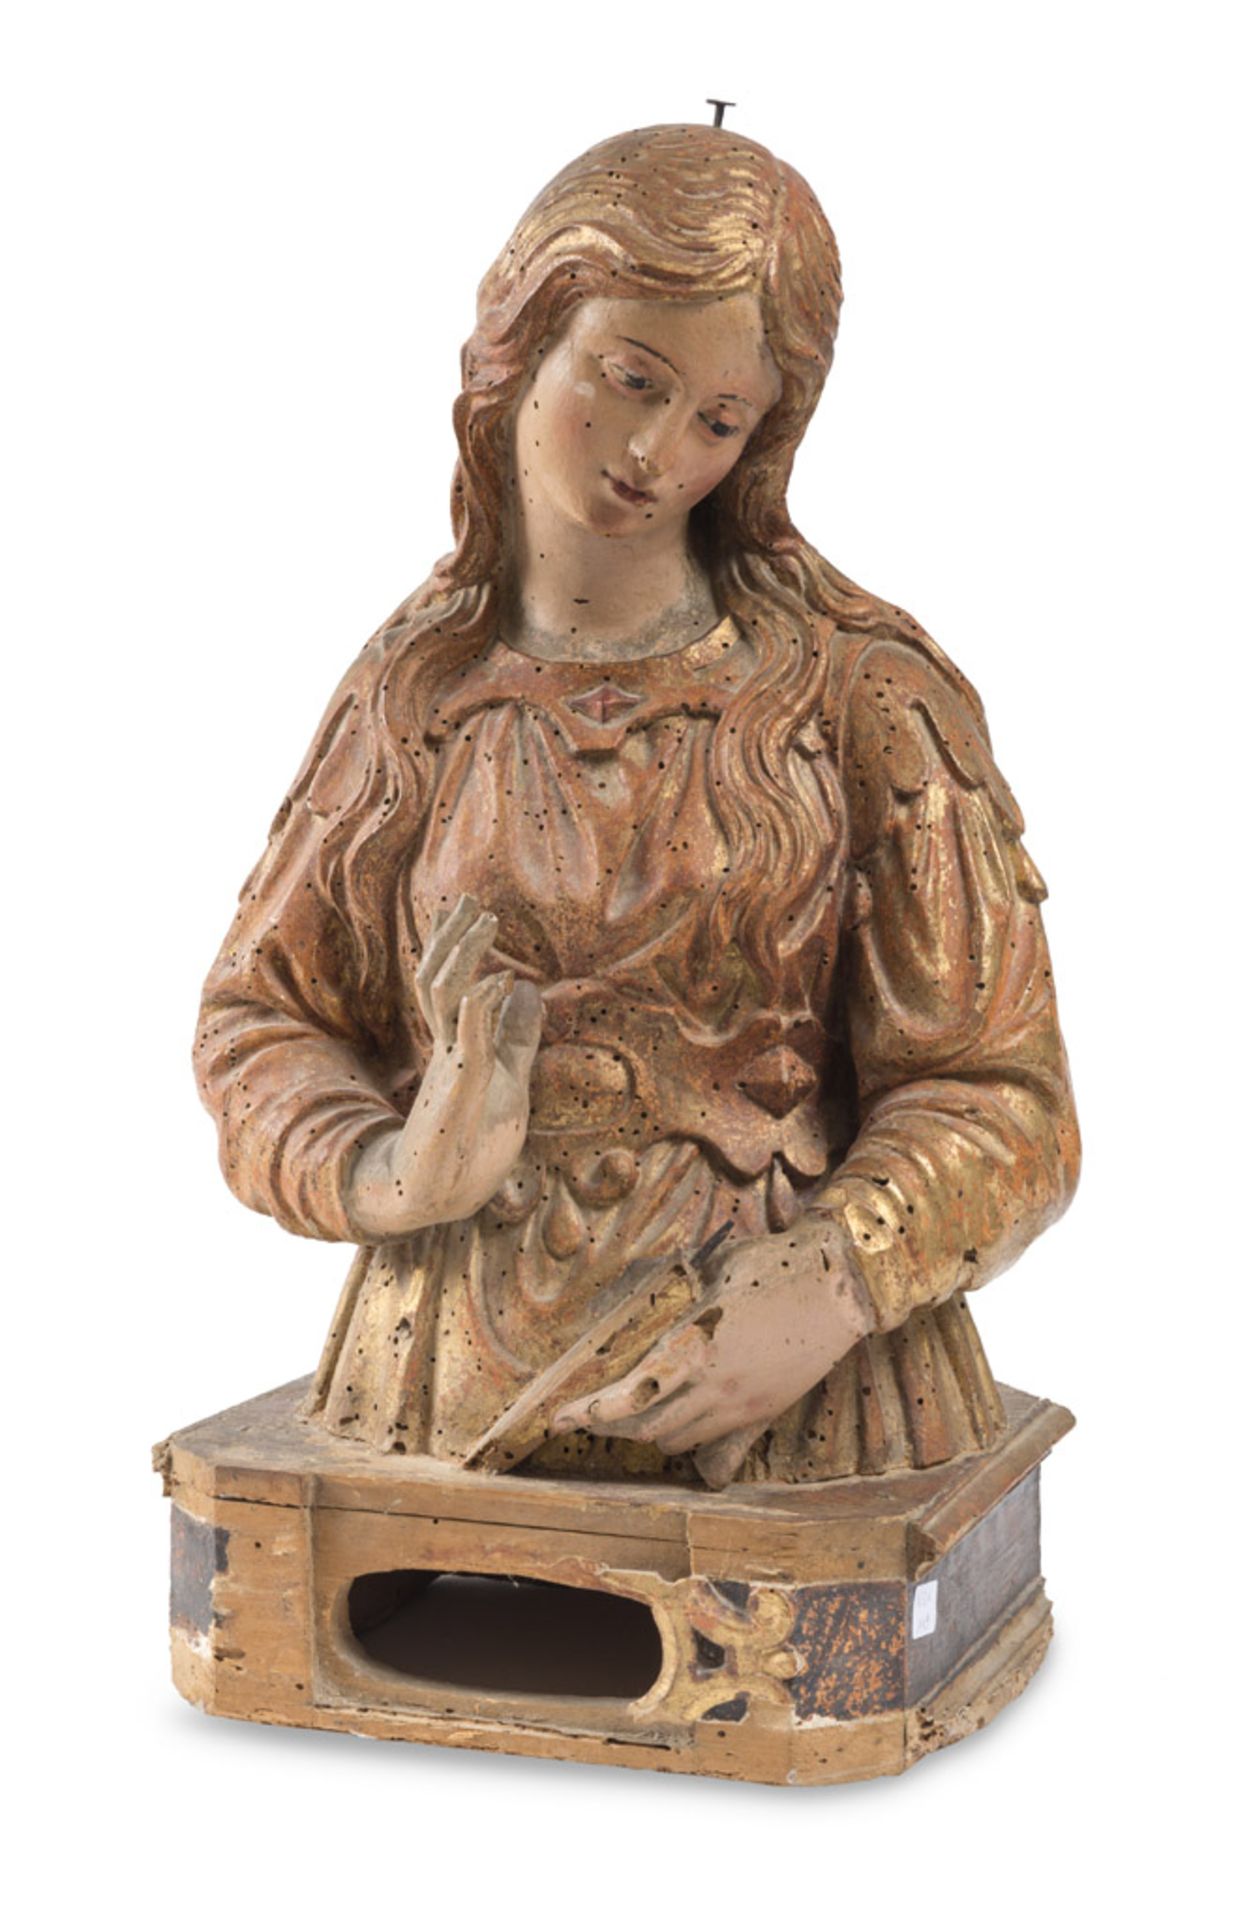 UMBRIAN SCULPTOR, 17TH CENTURY BUST OF SAINT MARTYR Wooden sculpture gilded on red bolus cm. 57 x 30